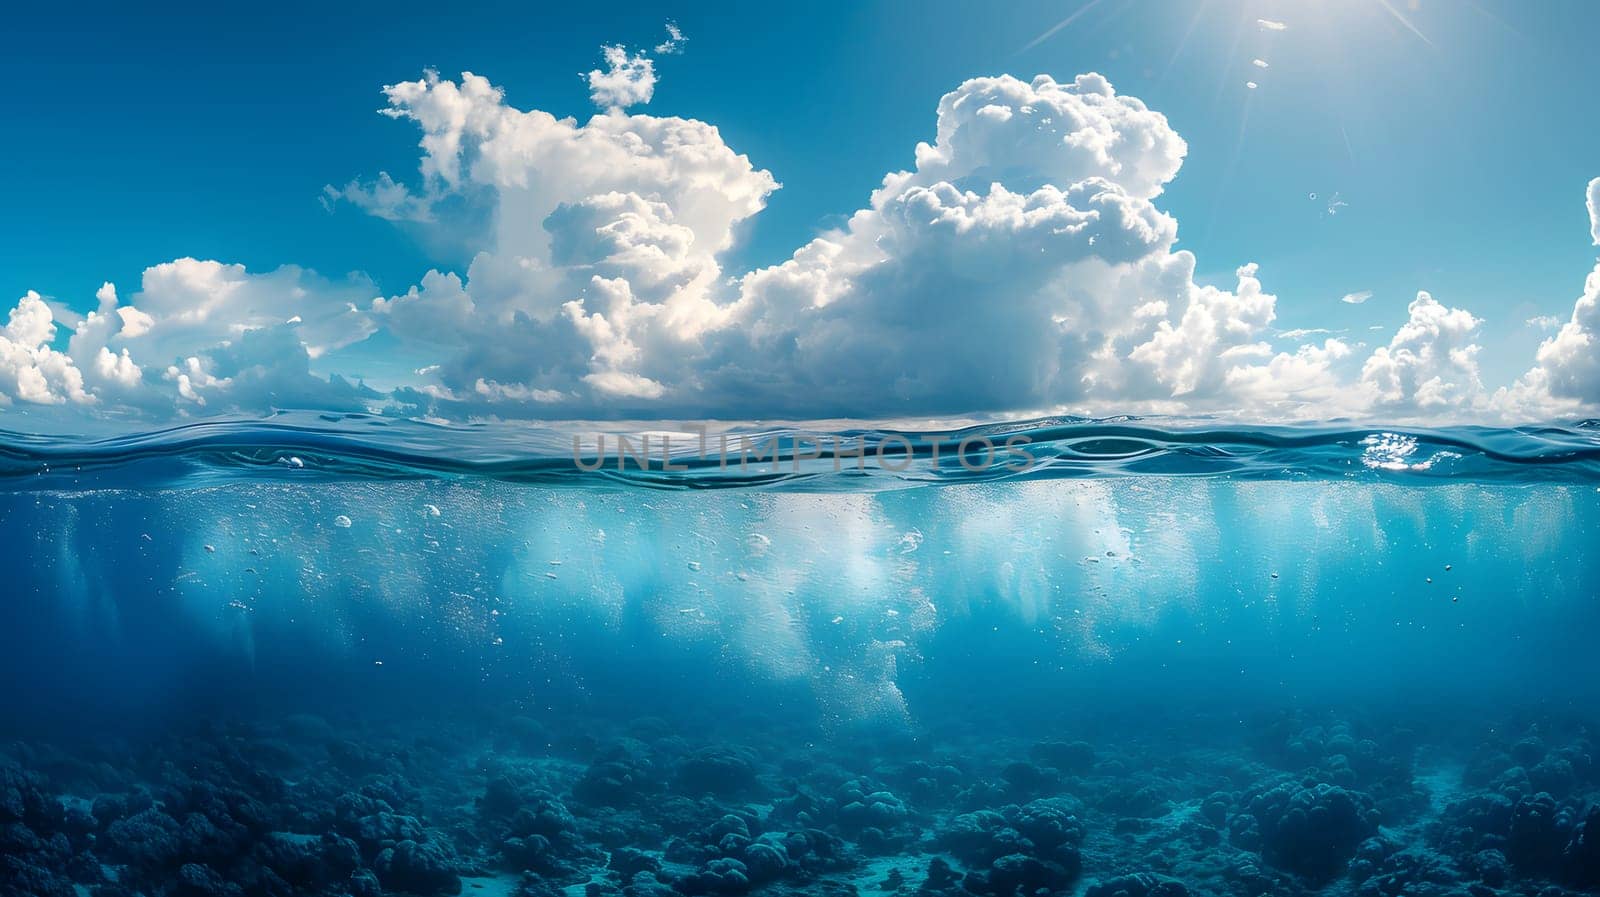 Partial underwater view of coral reef with cloud reflections in blue water by Nadtochiy